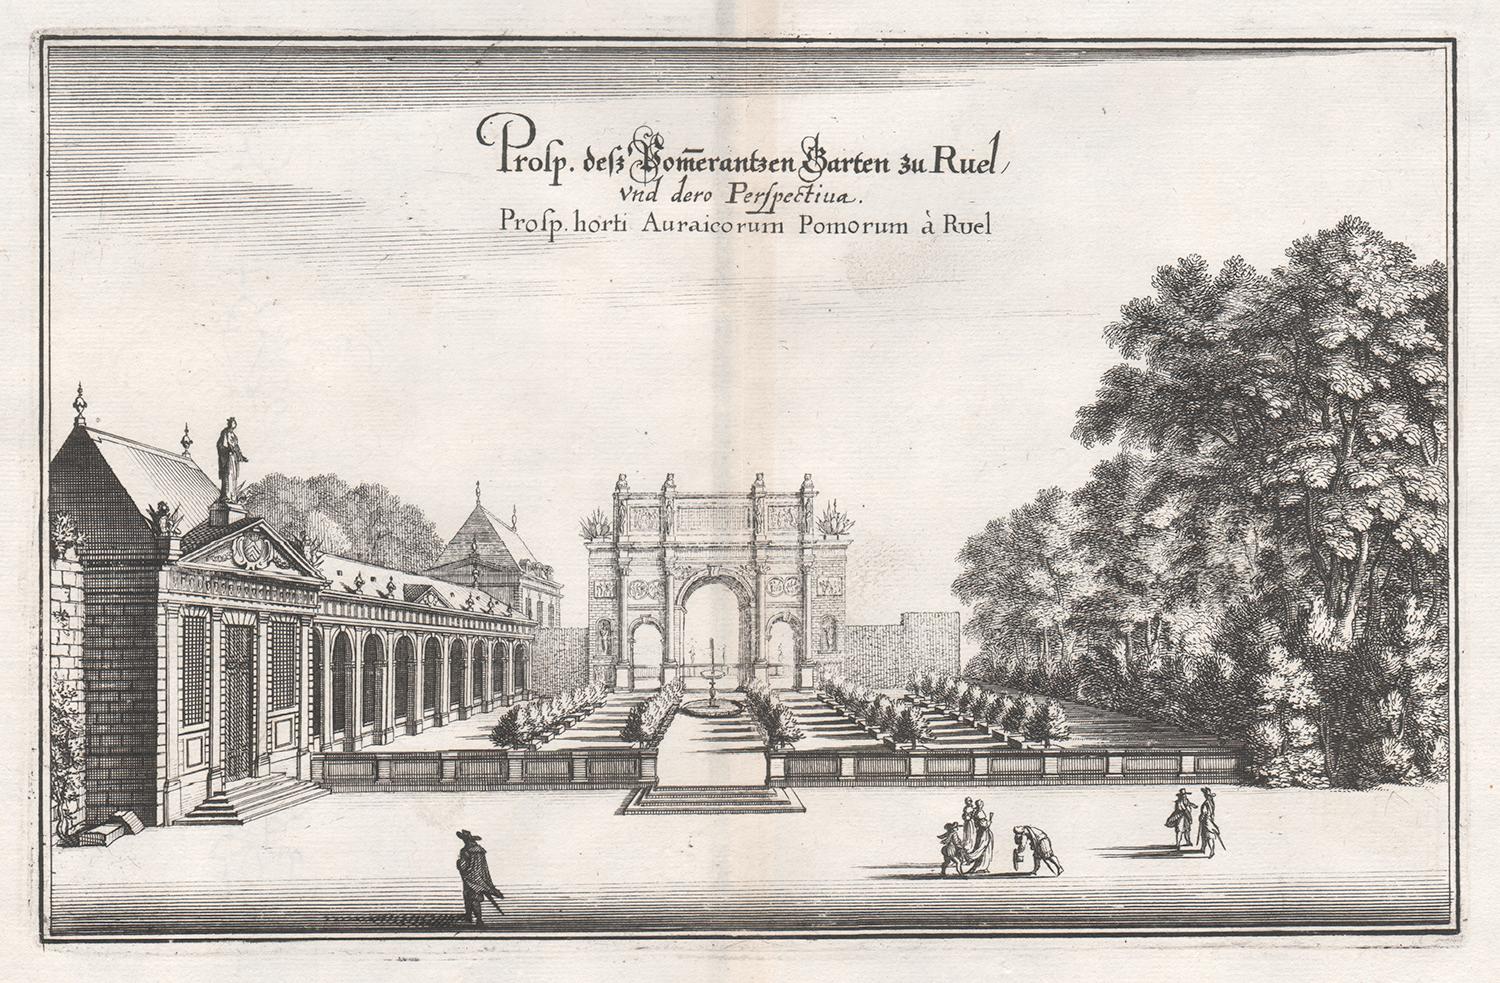 Gardens of the Chateau Rueil, Paris, France, mid 17th century engraving